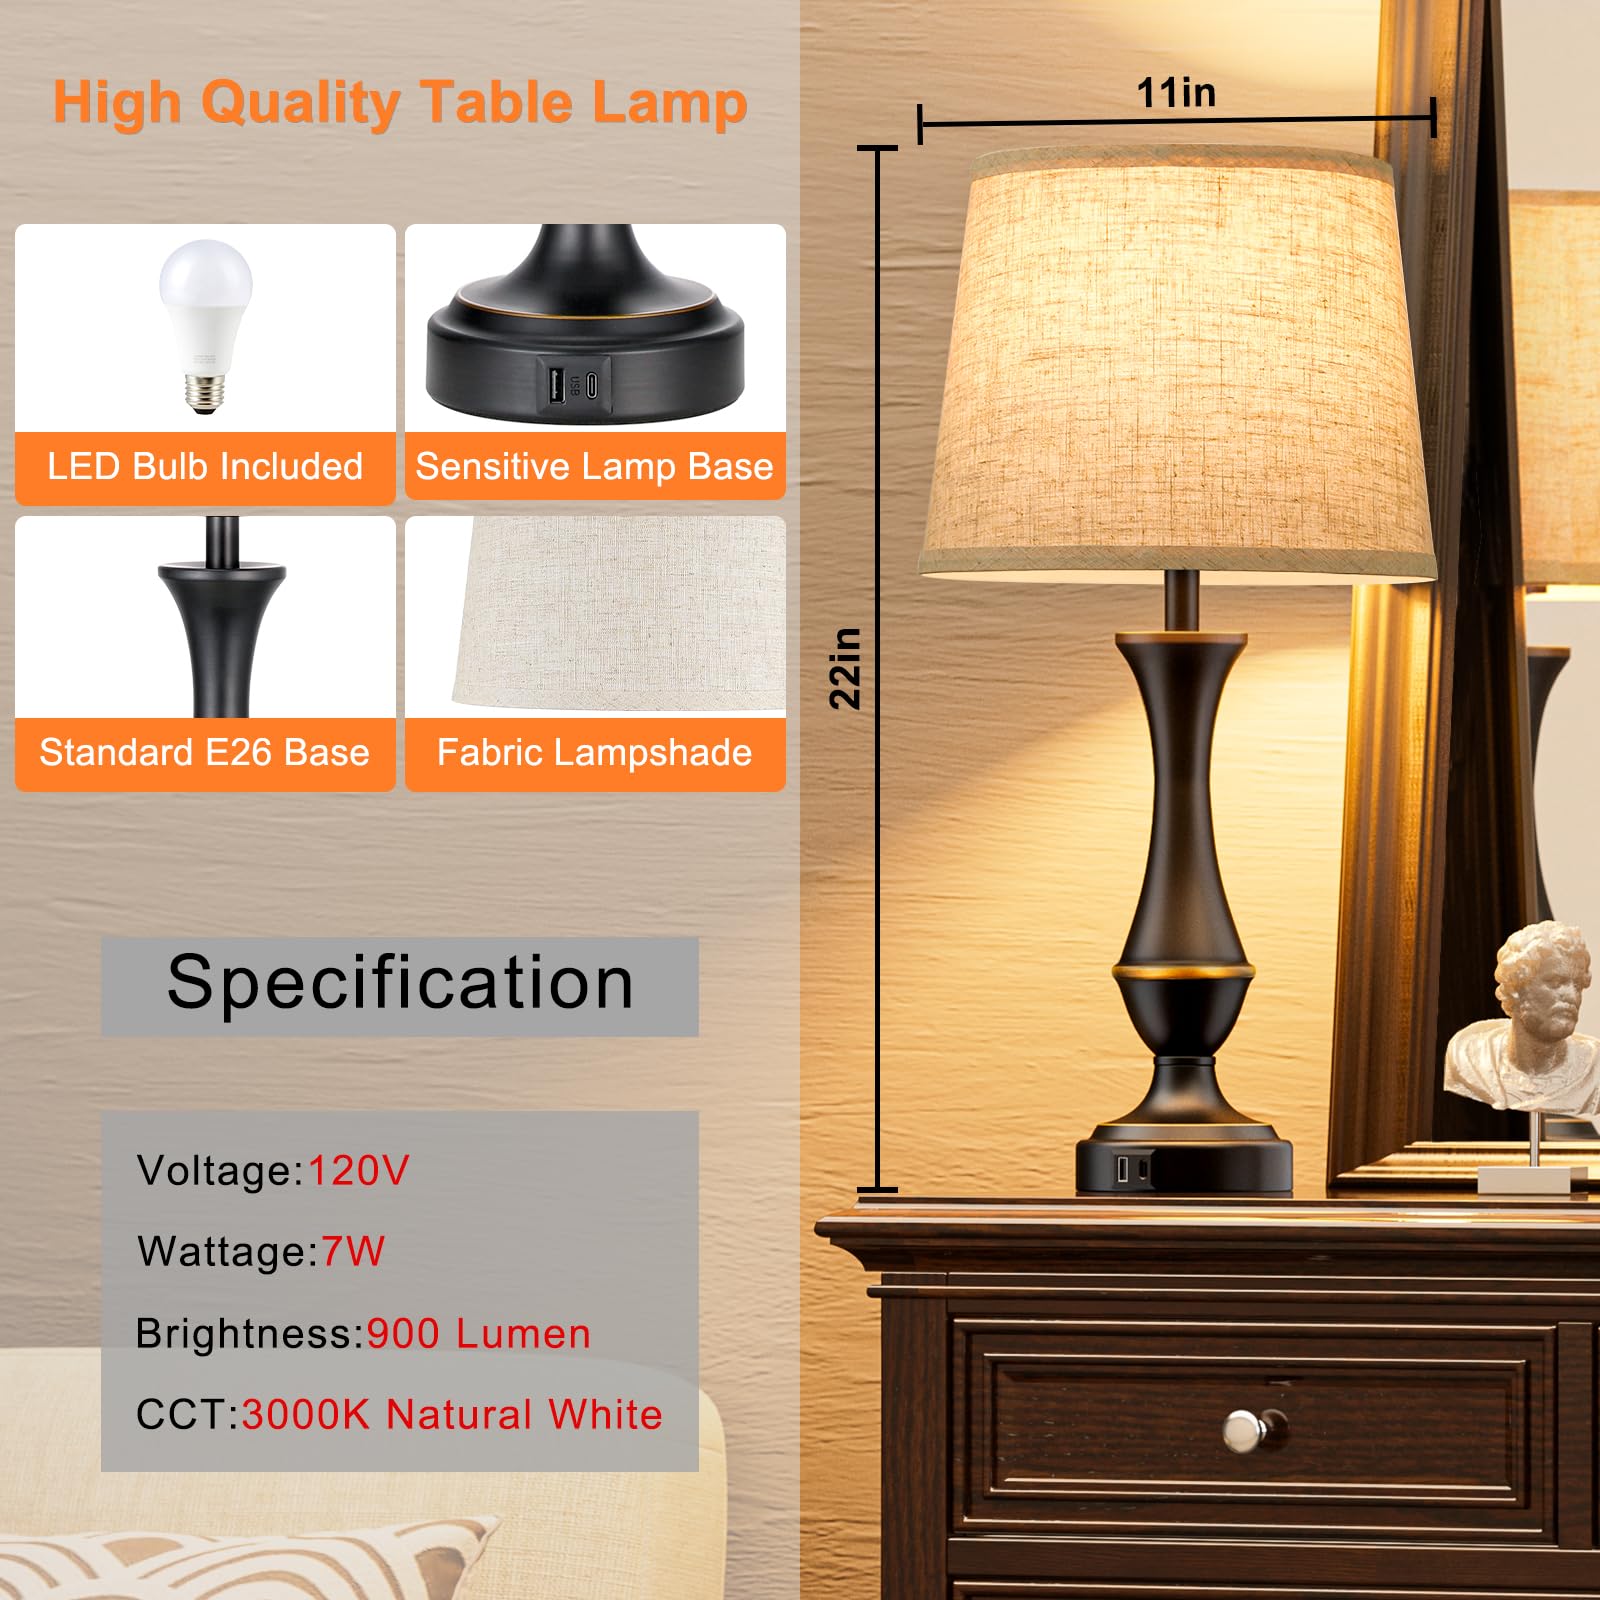 Upgraded Touch Lamps for Bedrooms Set of 2 - Nightstand Table Lamp with USB C+A, 3 Way Dimmable Bedside Lamps for Living Room End Tables, Farmhouse BedroomLamp1 Night Stand Lamps for Office